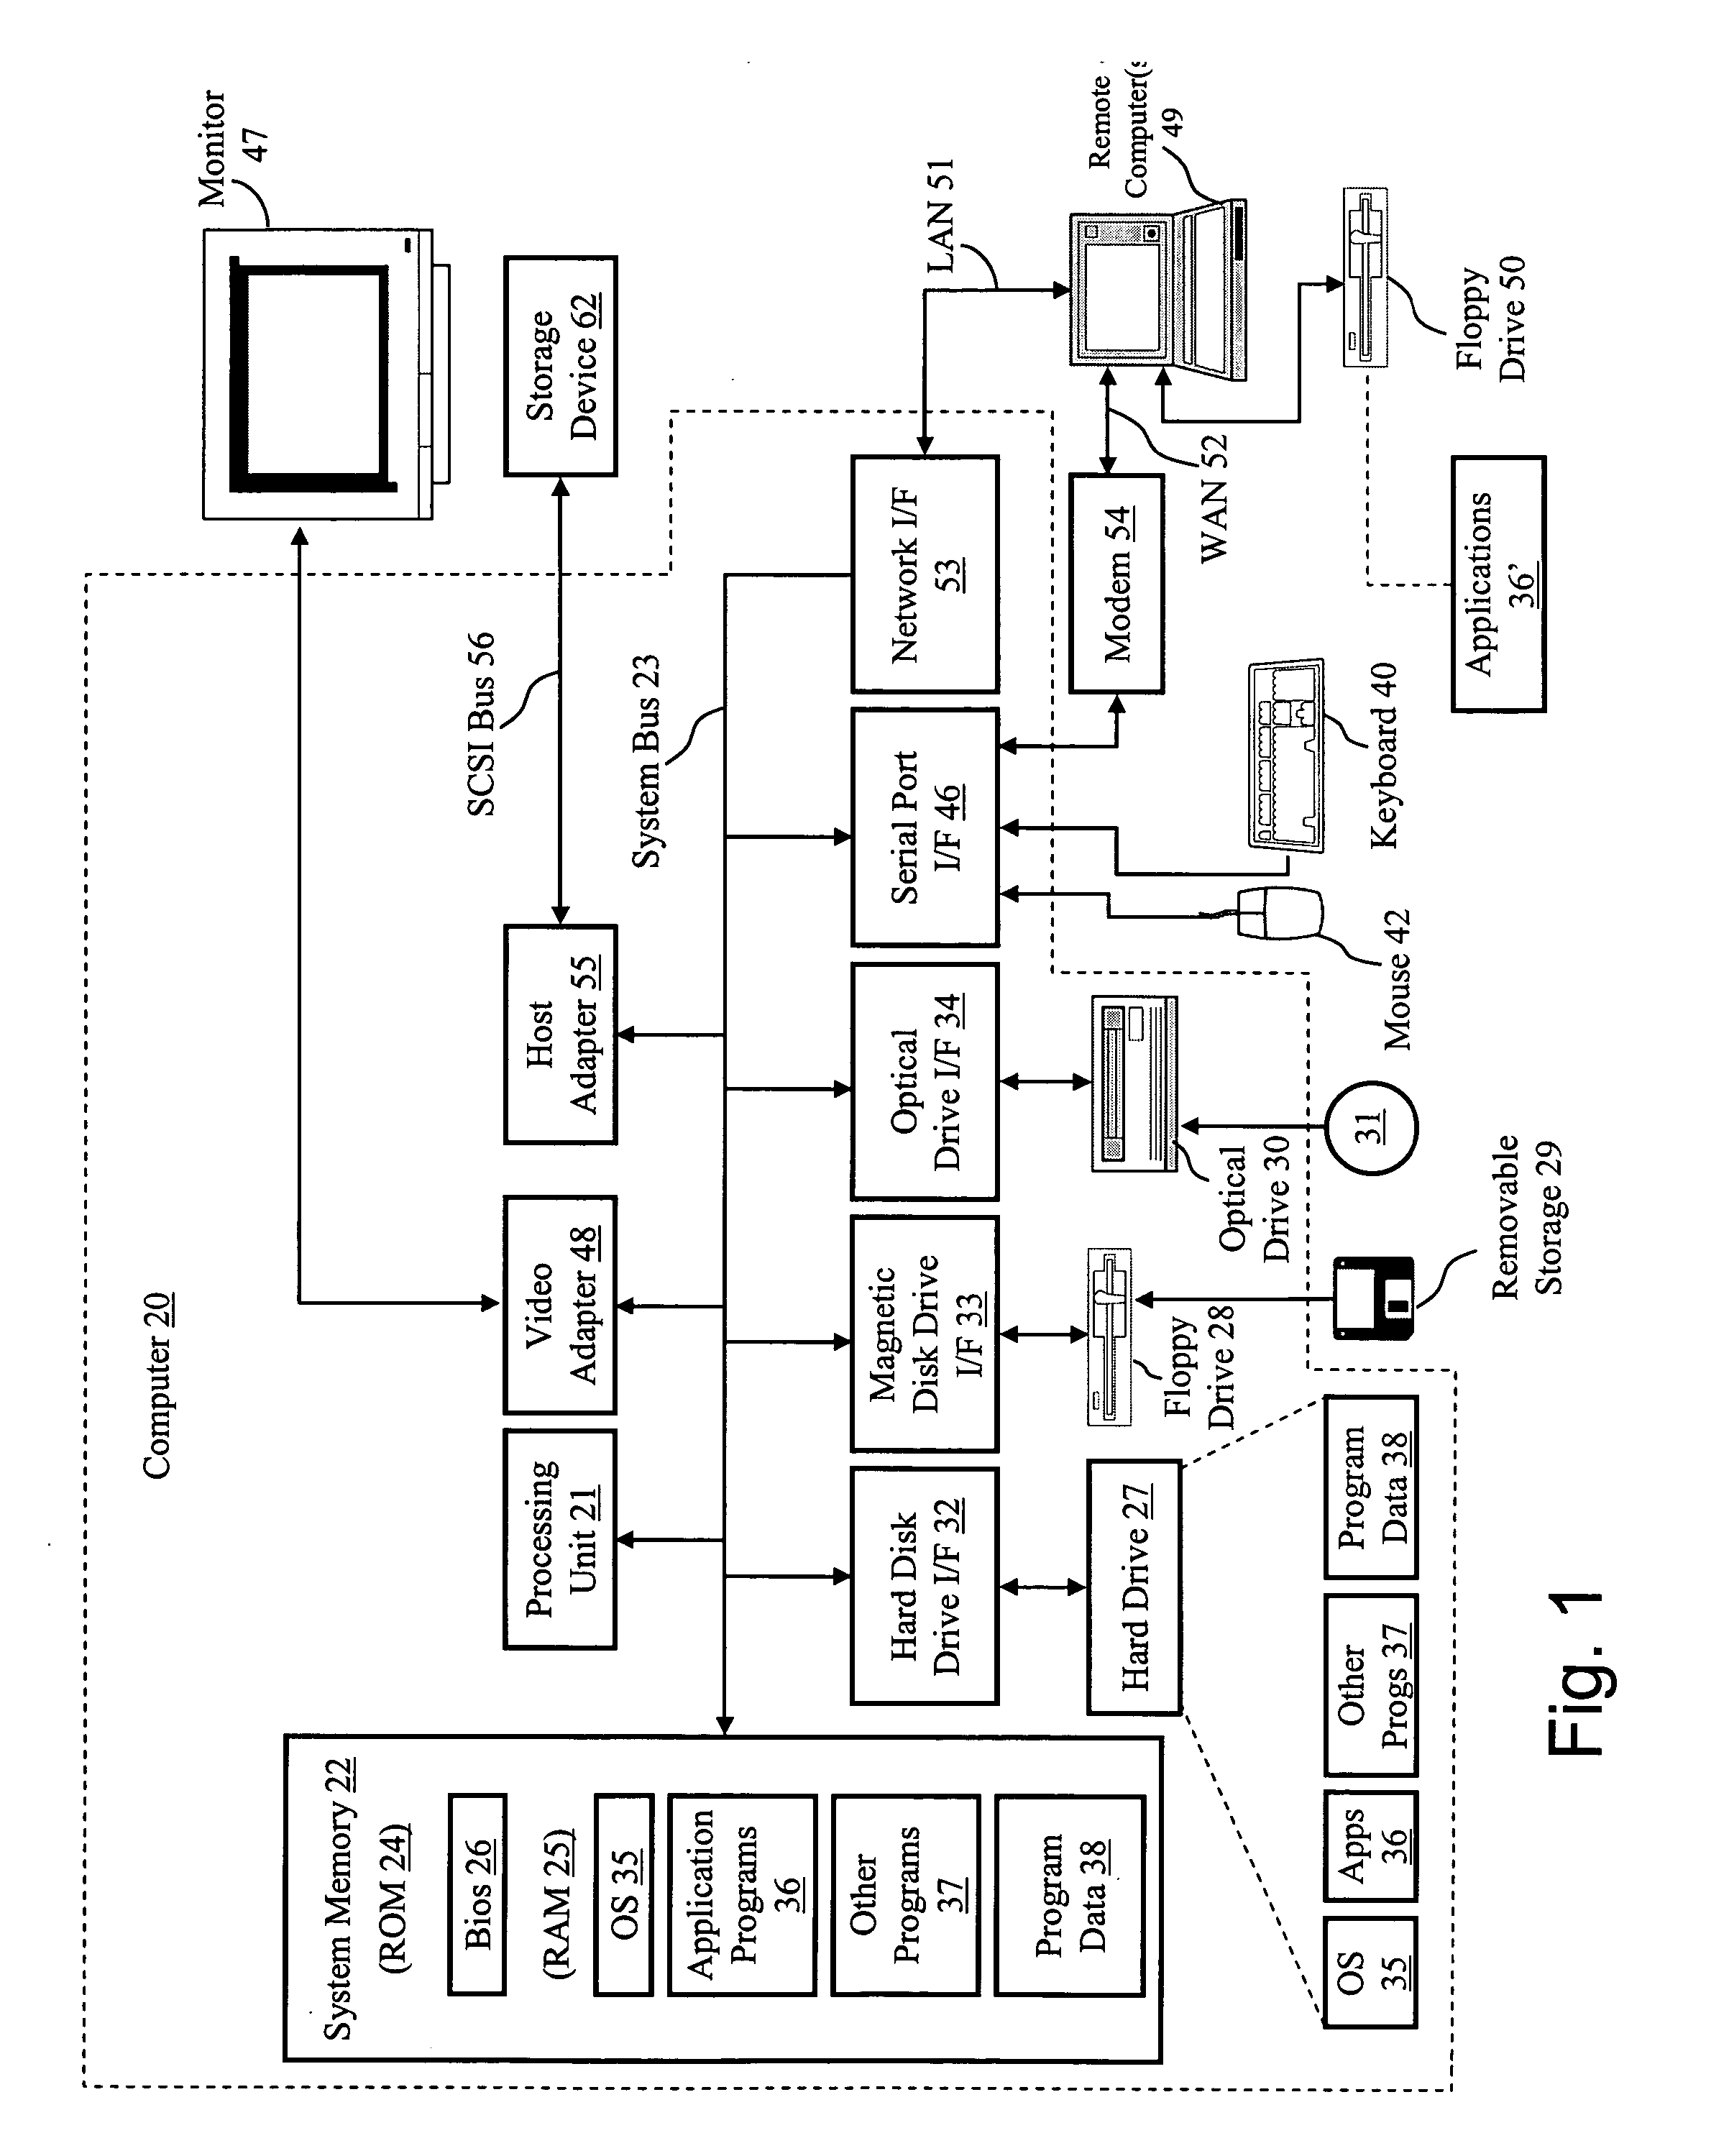 Systems and methods for initializing multiple virtual processors within a single virtual machine